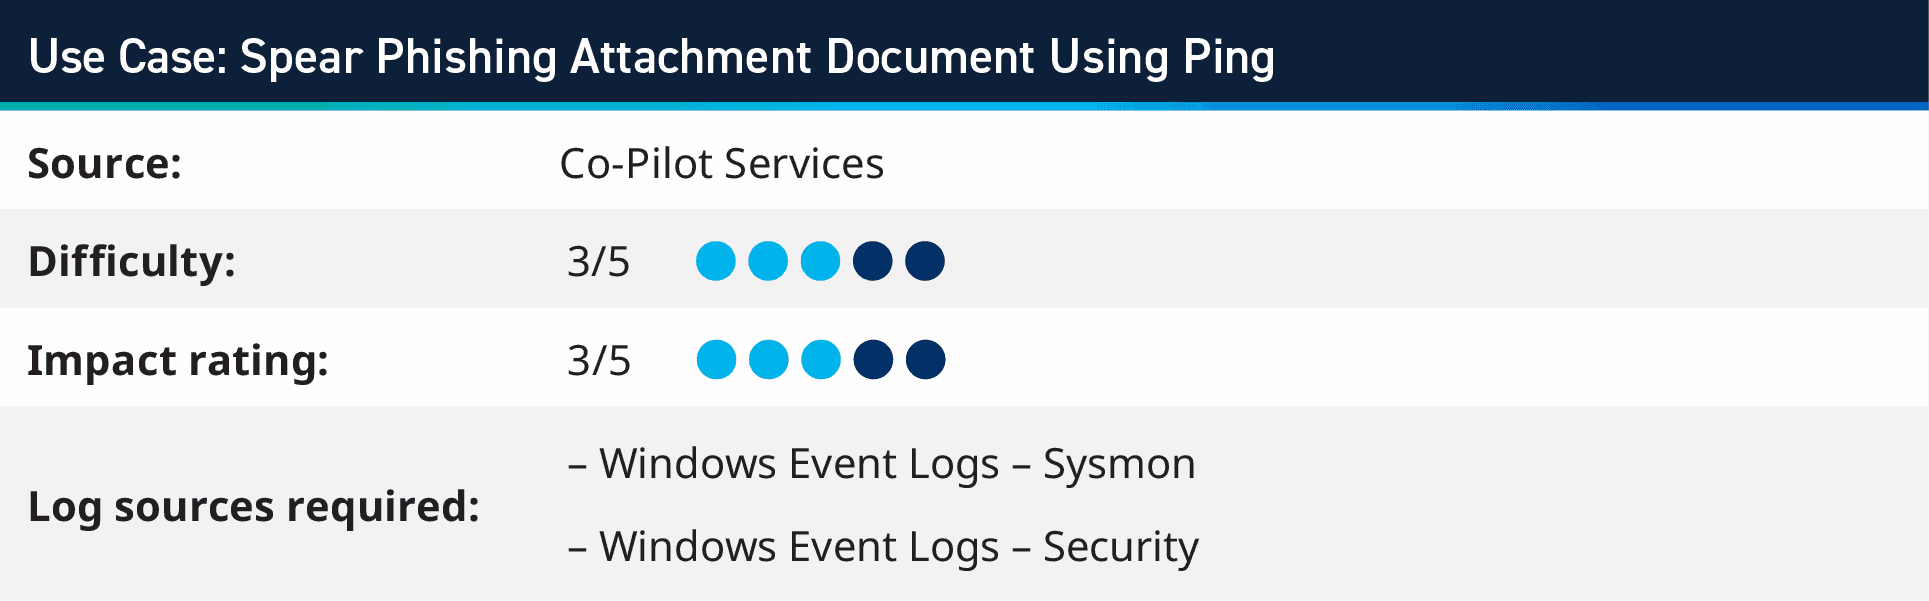 Cybersecurity Use Case: Spear Phishing Attachment Document Using Ping – T1566.001